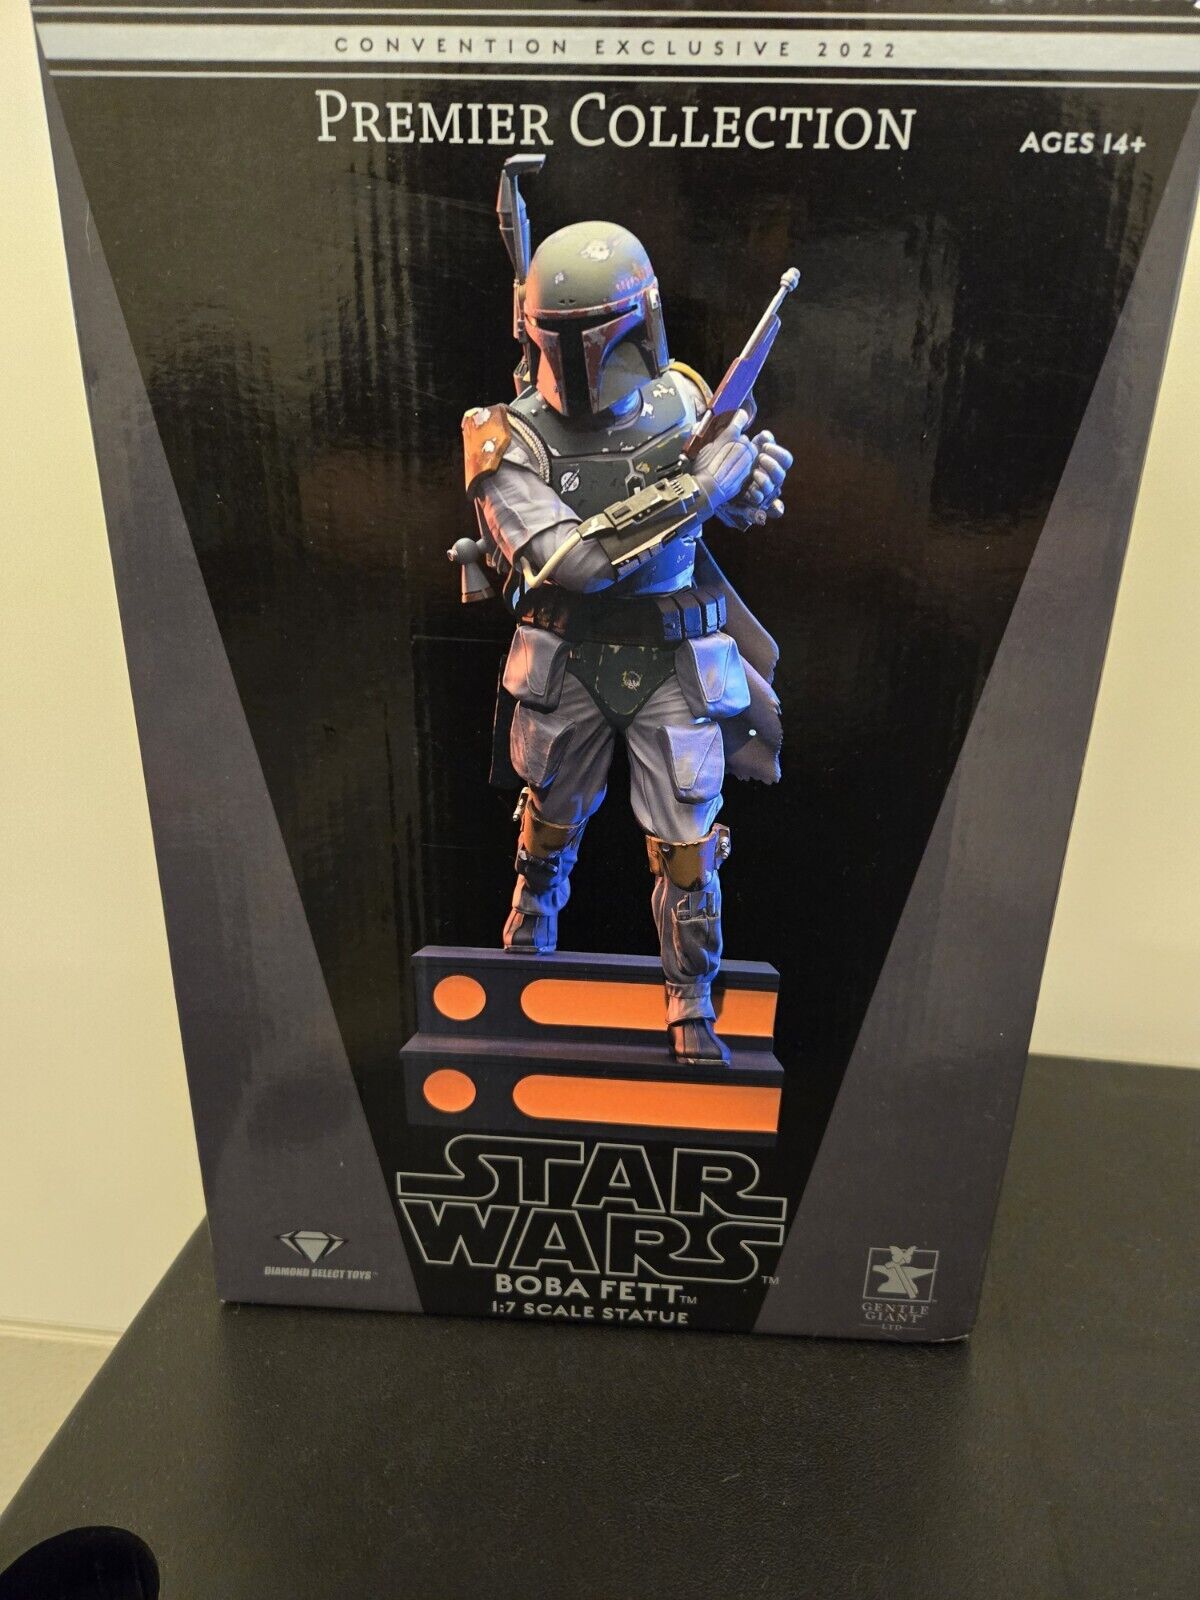 Star Wars Gentle Giant Boba Fett Premier Collection 1:7 Scale Statue Exclusive